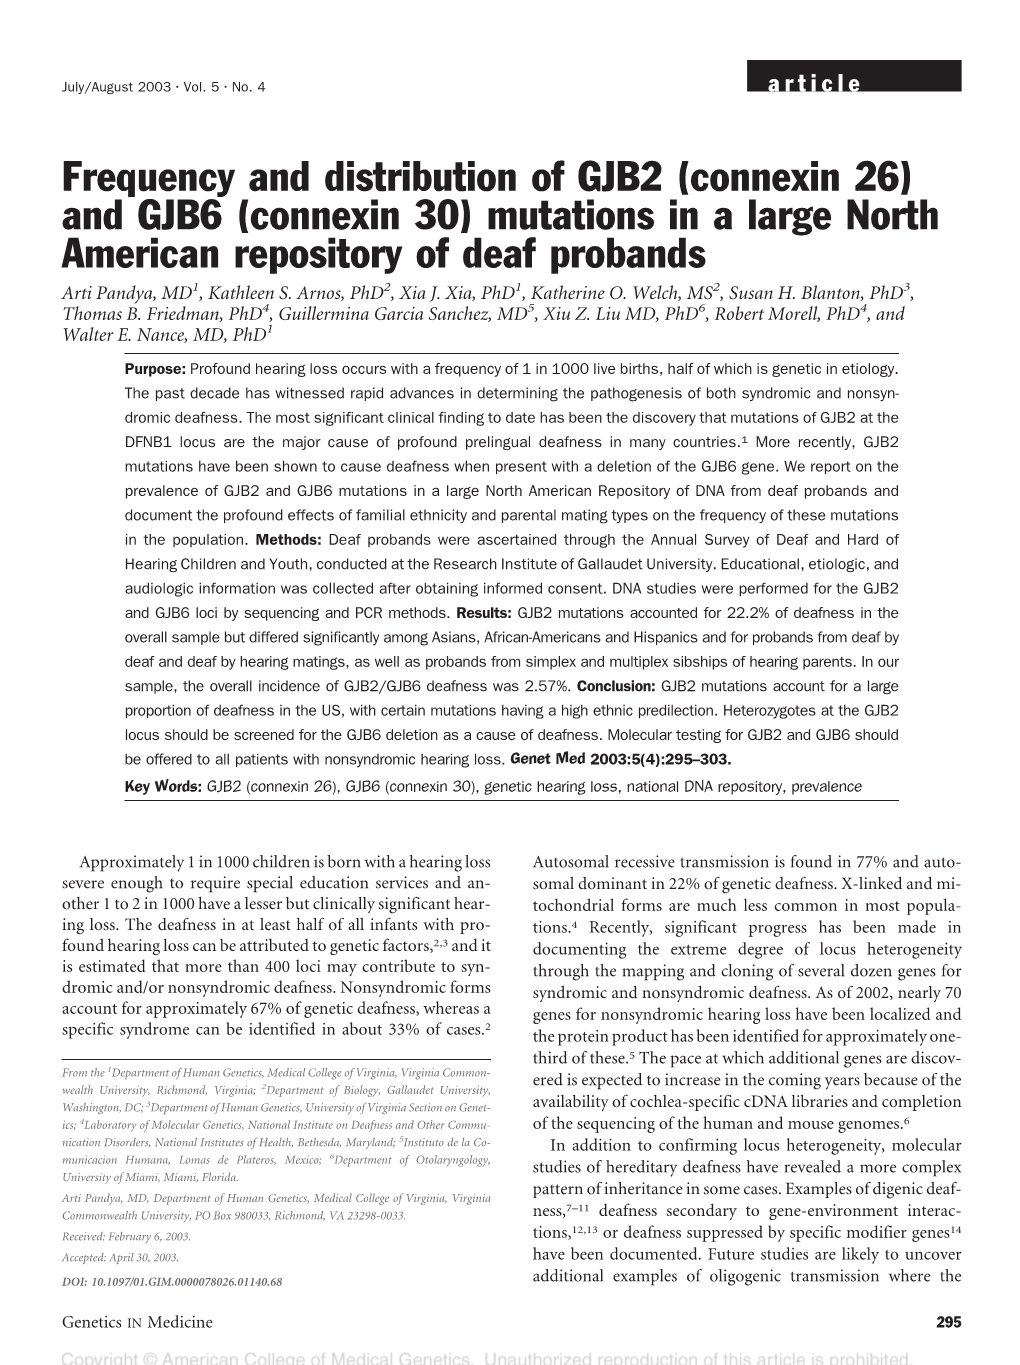 Frequency and Distribution of GJB2 (Connexin 26) and GJB6 (Connexin 30) Mutations in a Large North American Repository of Deaf Probands Arti Pandya, MD1, Kathleen S